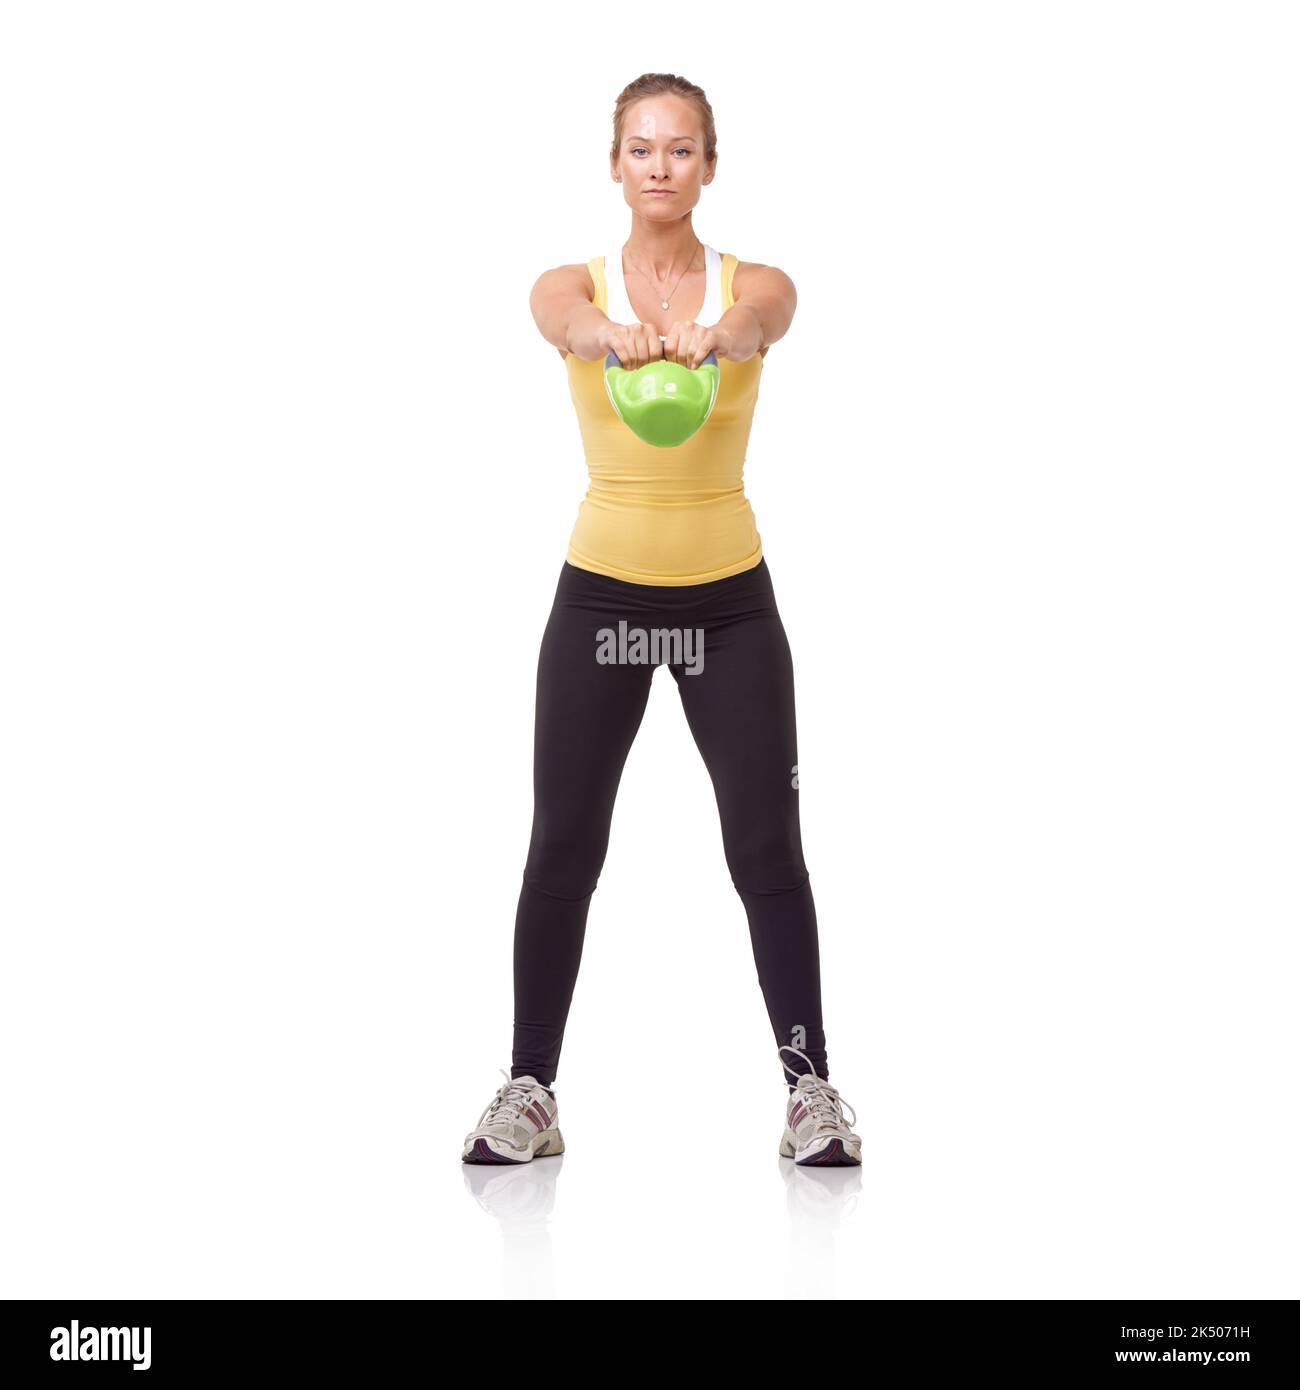 Engaging her glutes. A beautiful blonde woman performing a two-handed kettlebell swing. Stock Photo